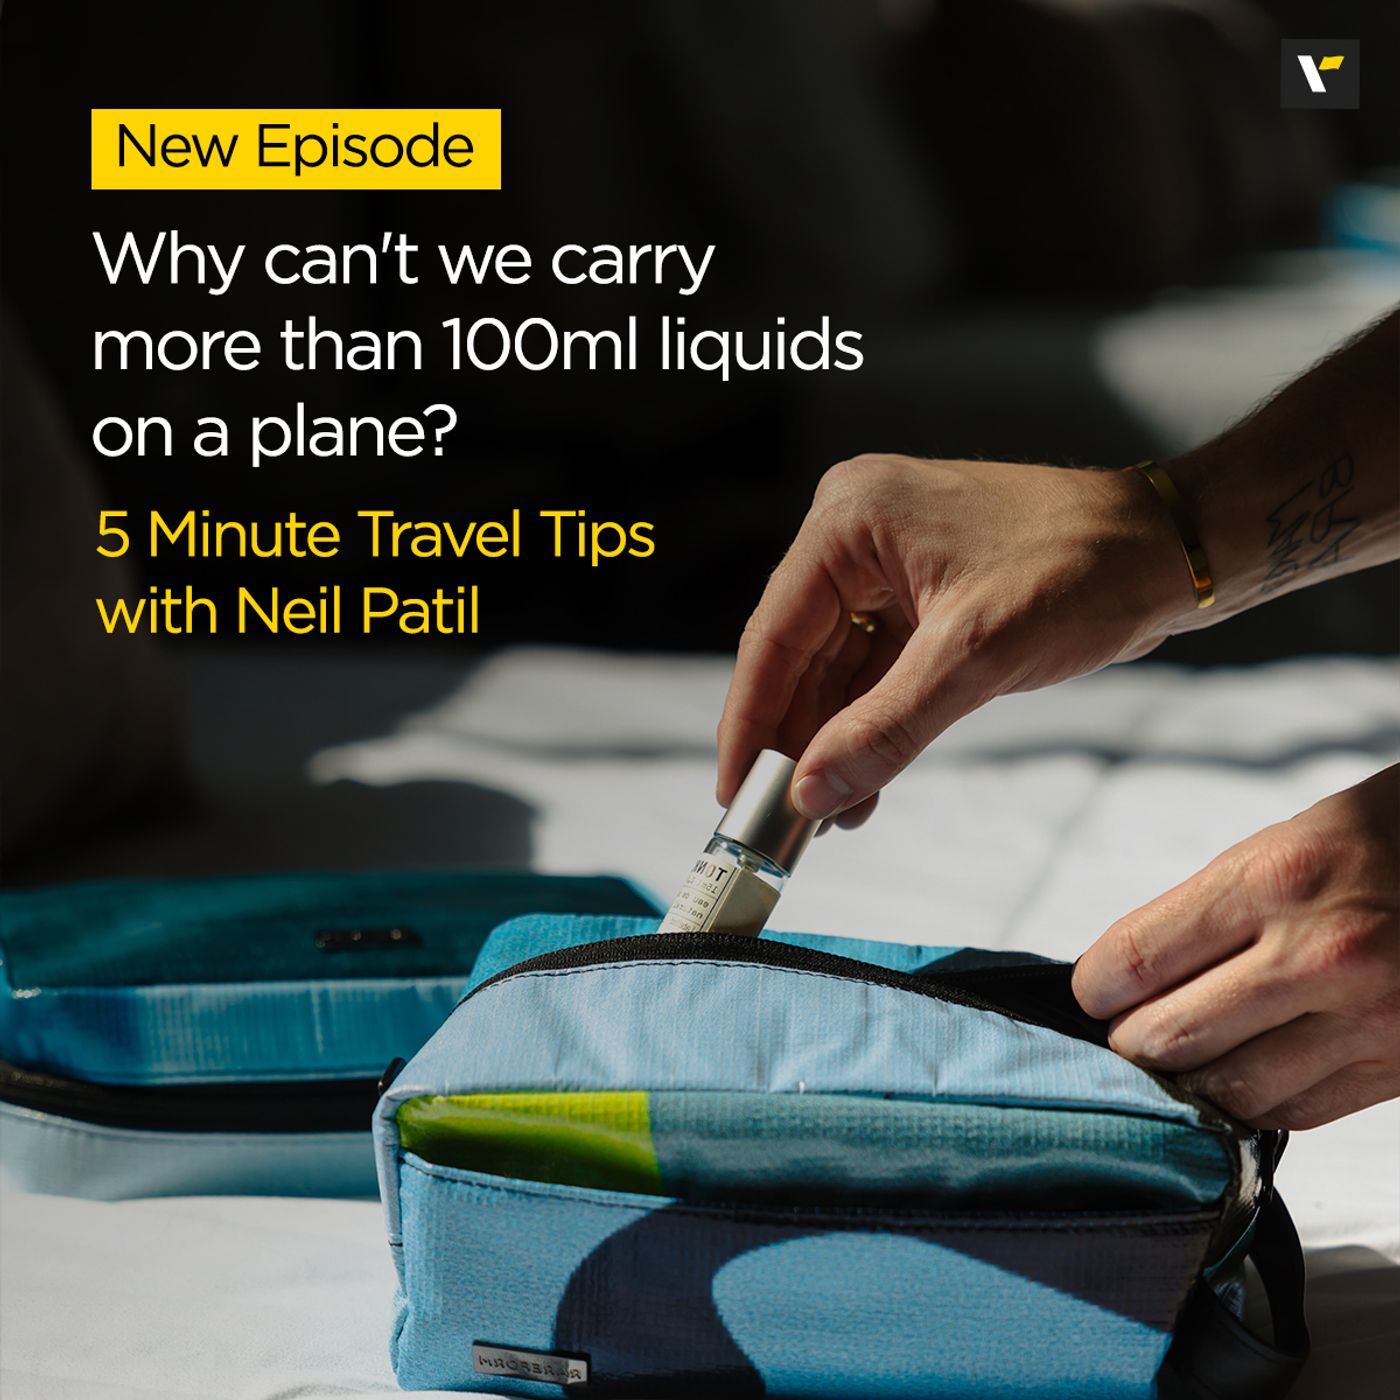 Why can't we carry more than 100ml liquids on a plane?